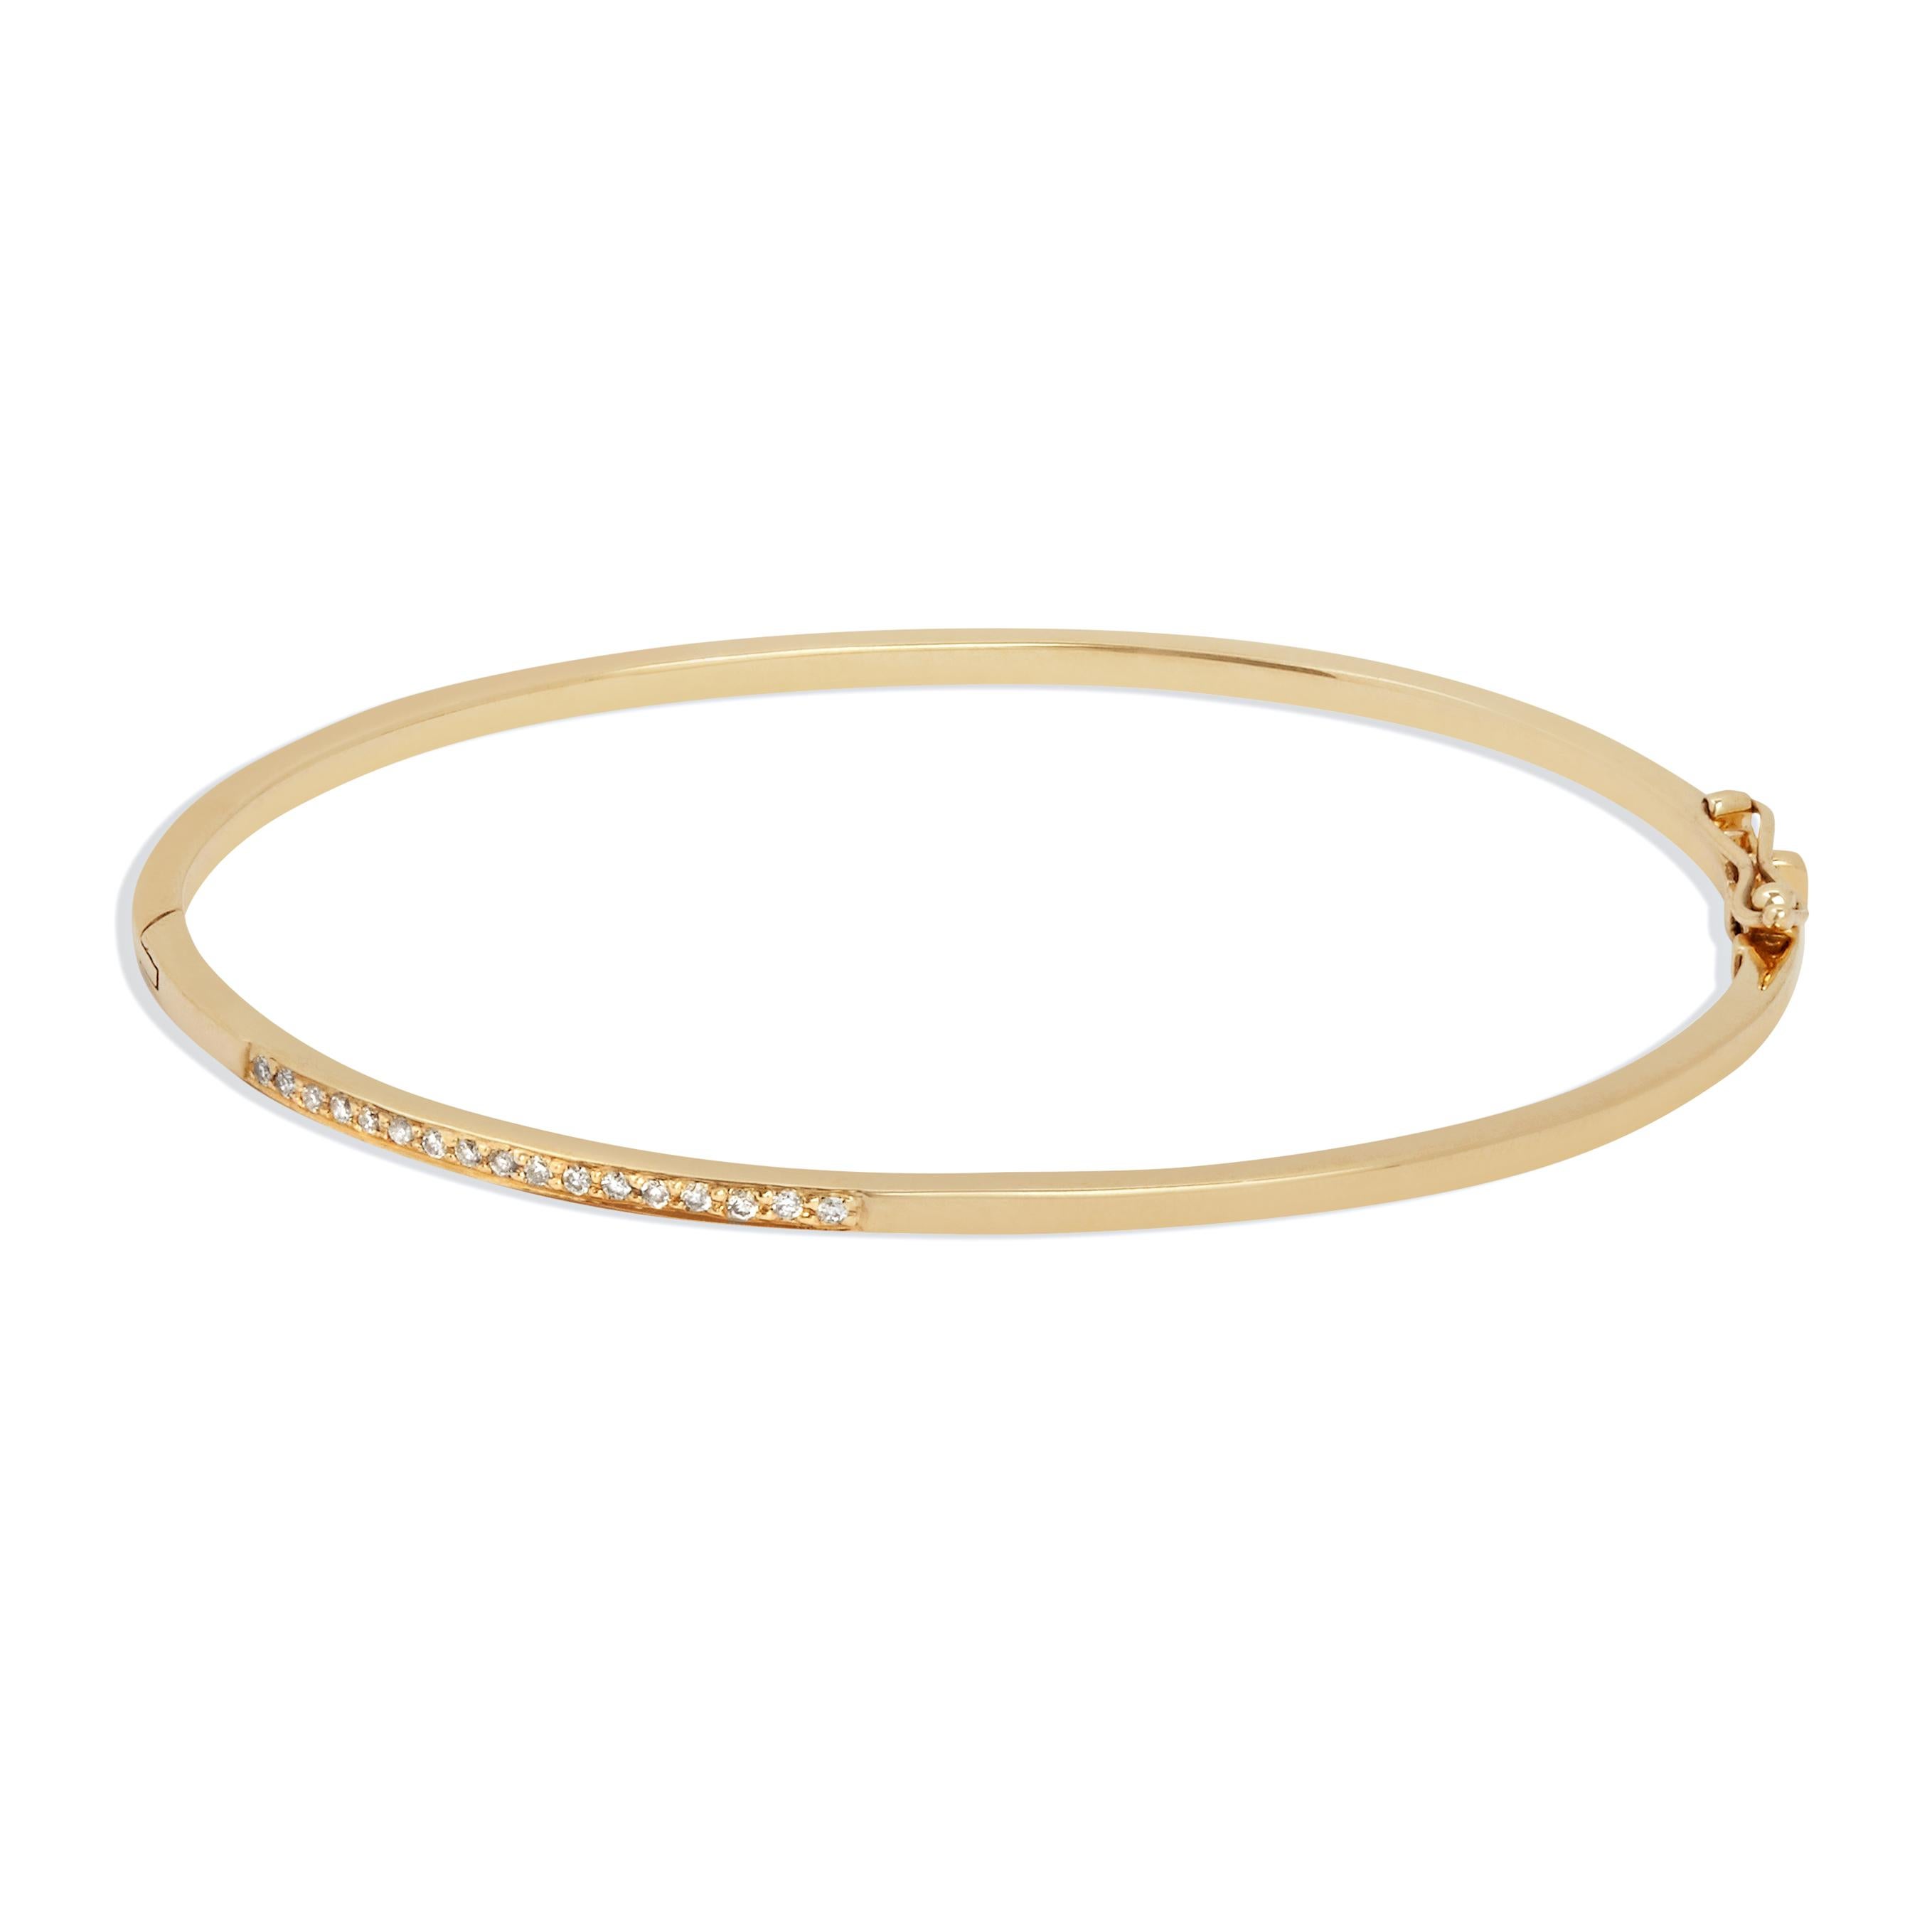 This clean-lined bangle features one inch of pave-set white diamonds.  The bracelet is crafted in solid 9-carat yellow gold with a discreet box clasp and figure-of-eight safety catch.

The black diamond accent features seventeen 1.2mm white diamonds